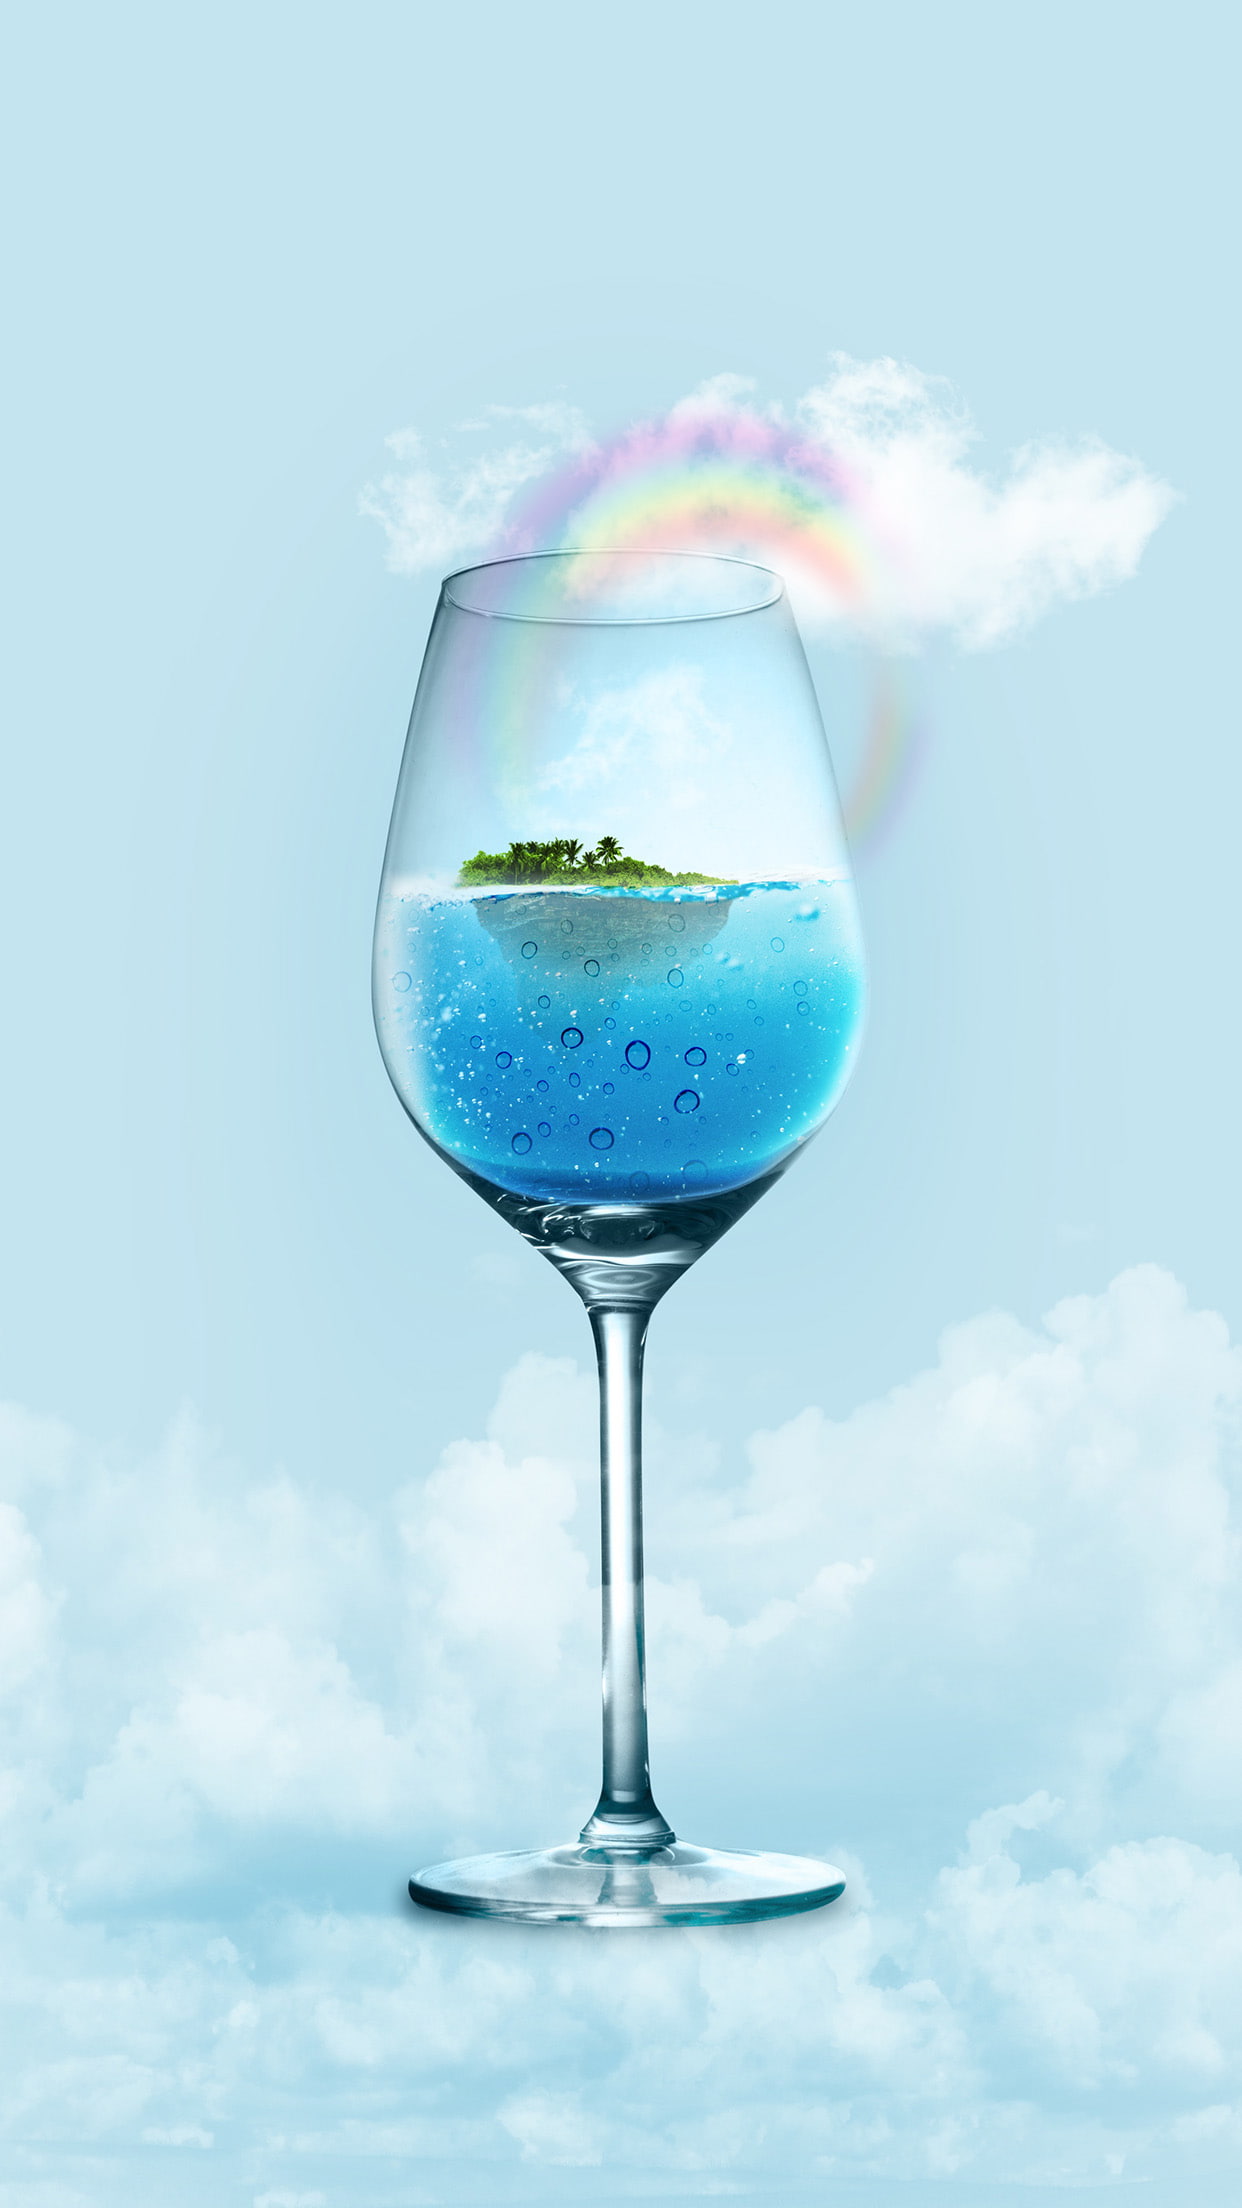 vertical, drinking glass, refreshment, food and drink, blue